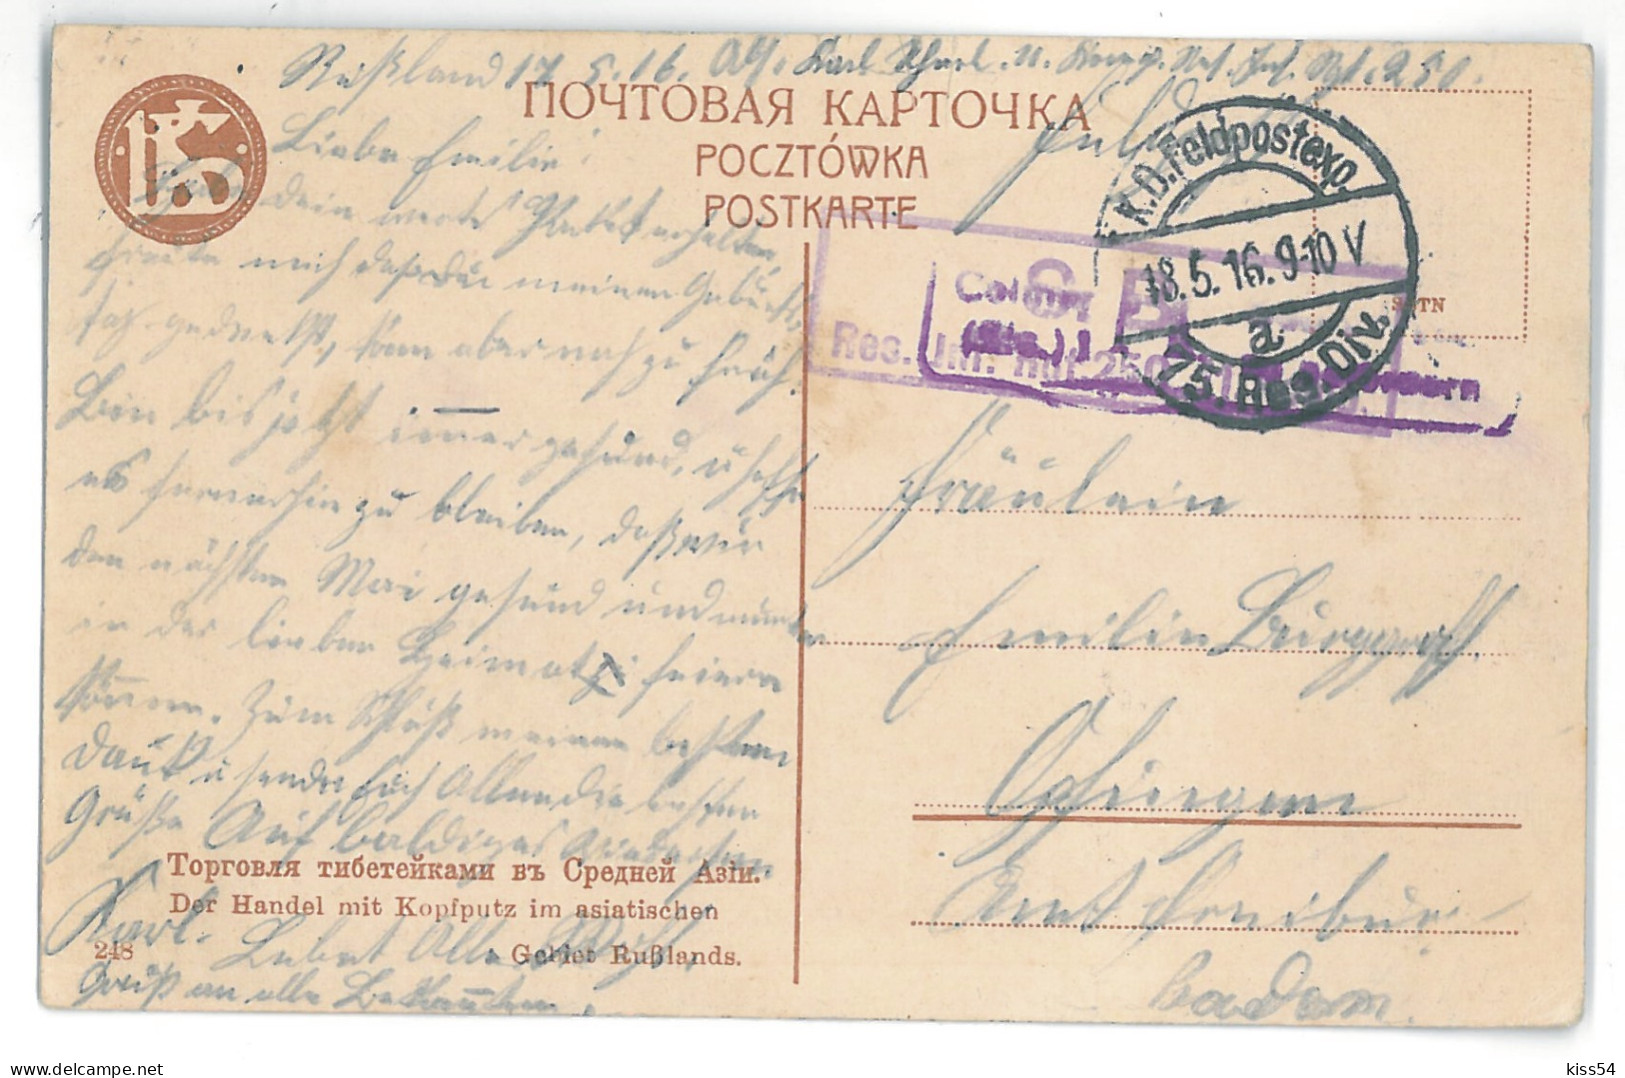 RUS 97 - 15204 ETHNICS From Central Asia, Russia - Old Postcard, CENSOR - Used - 1916 - Russia